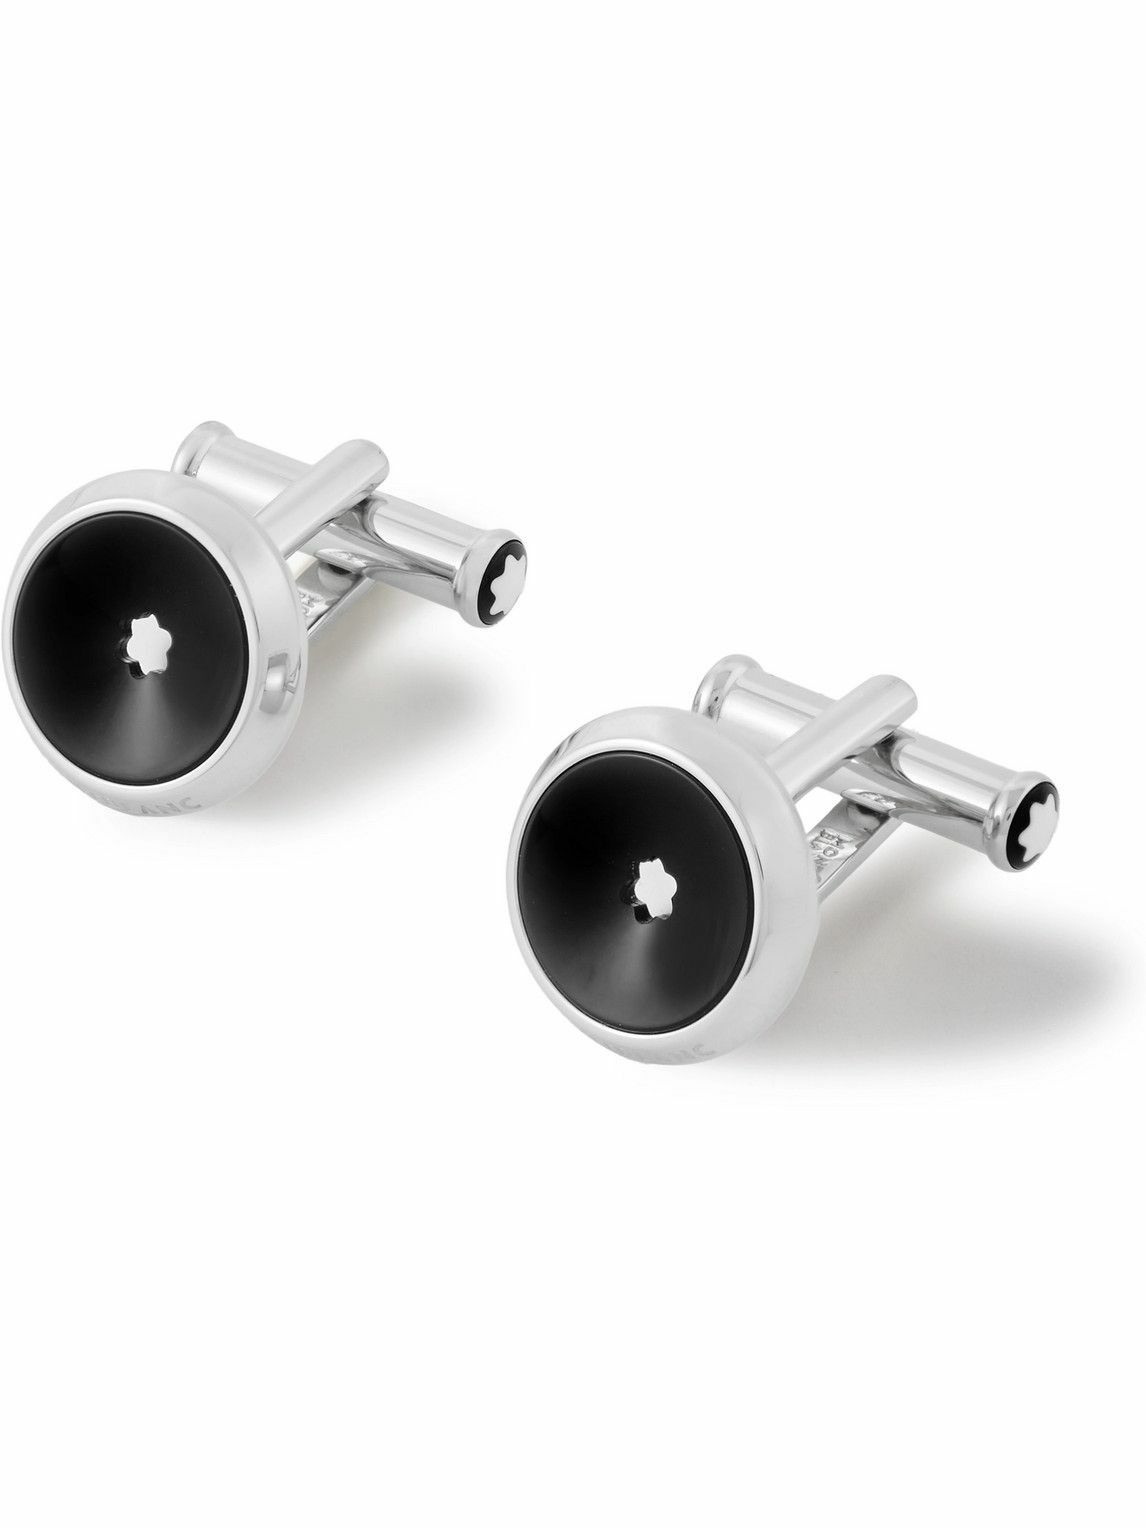 Montblanc - Stainless Steel and Resin Cufflinks Montblanc